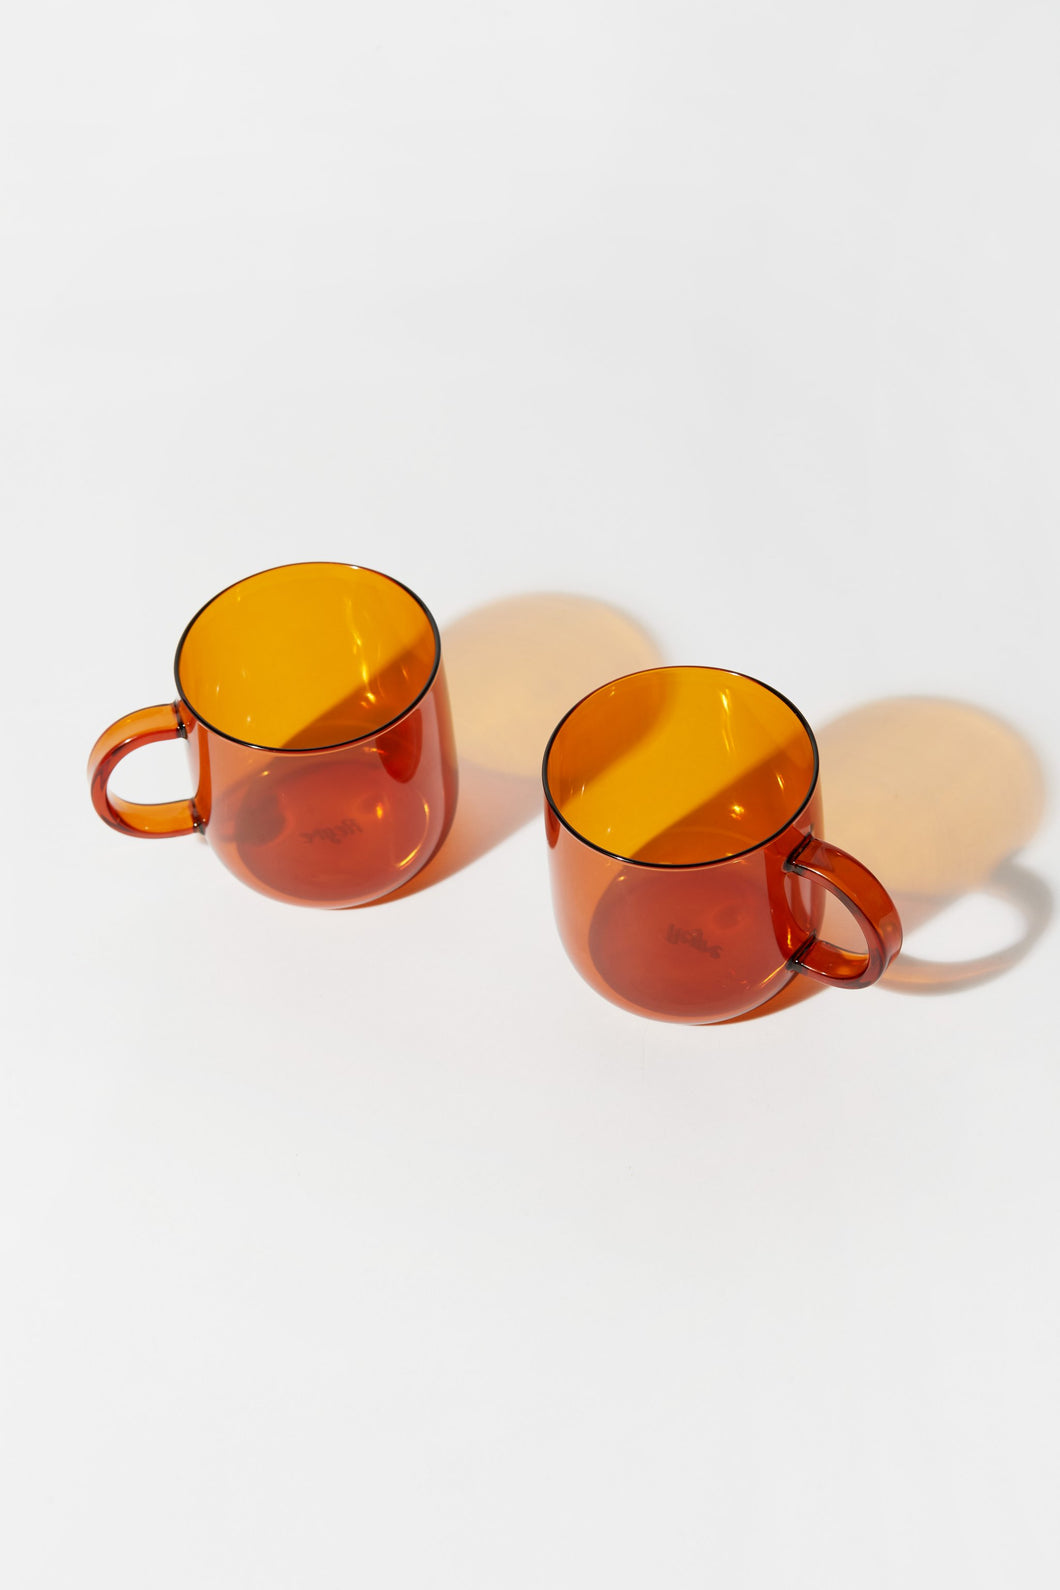 CORO CUP SET IN AMBER